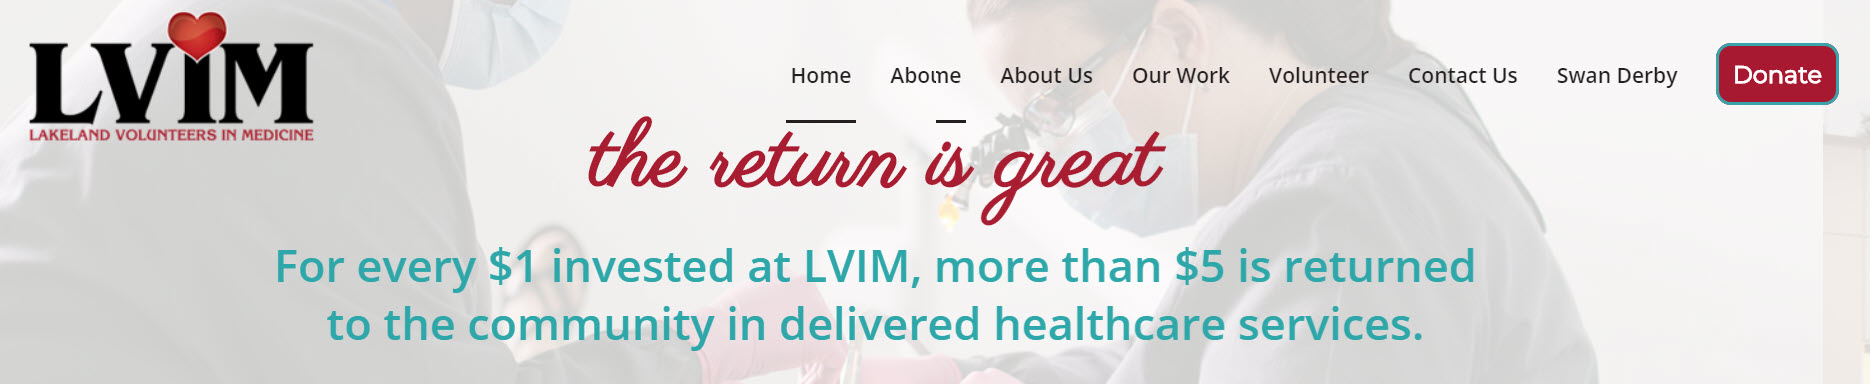 LVIM's "Donate" button on the header of their website.